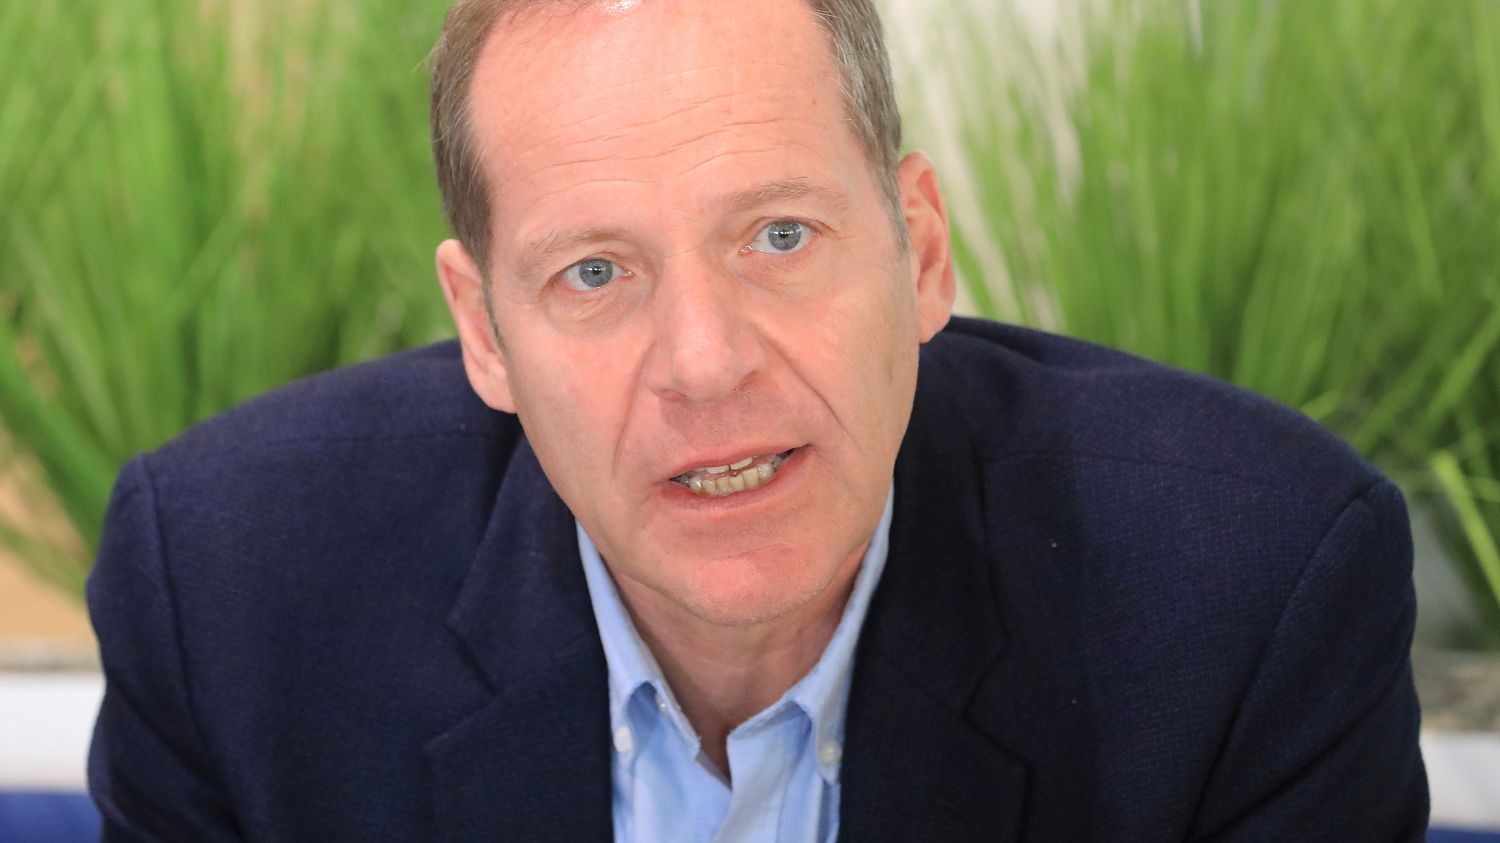 Paris-Roubaix: Christian Prudhomme wants "air bags" to protect cyclists